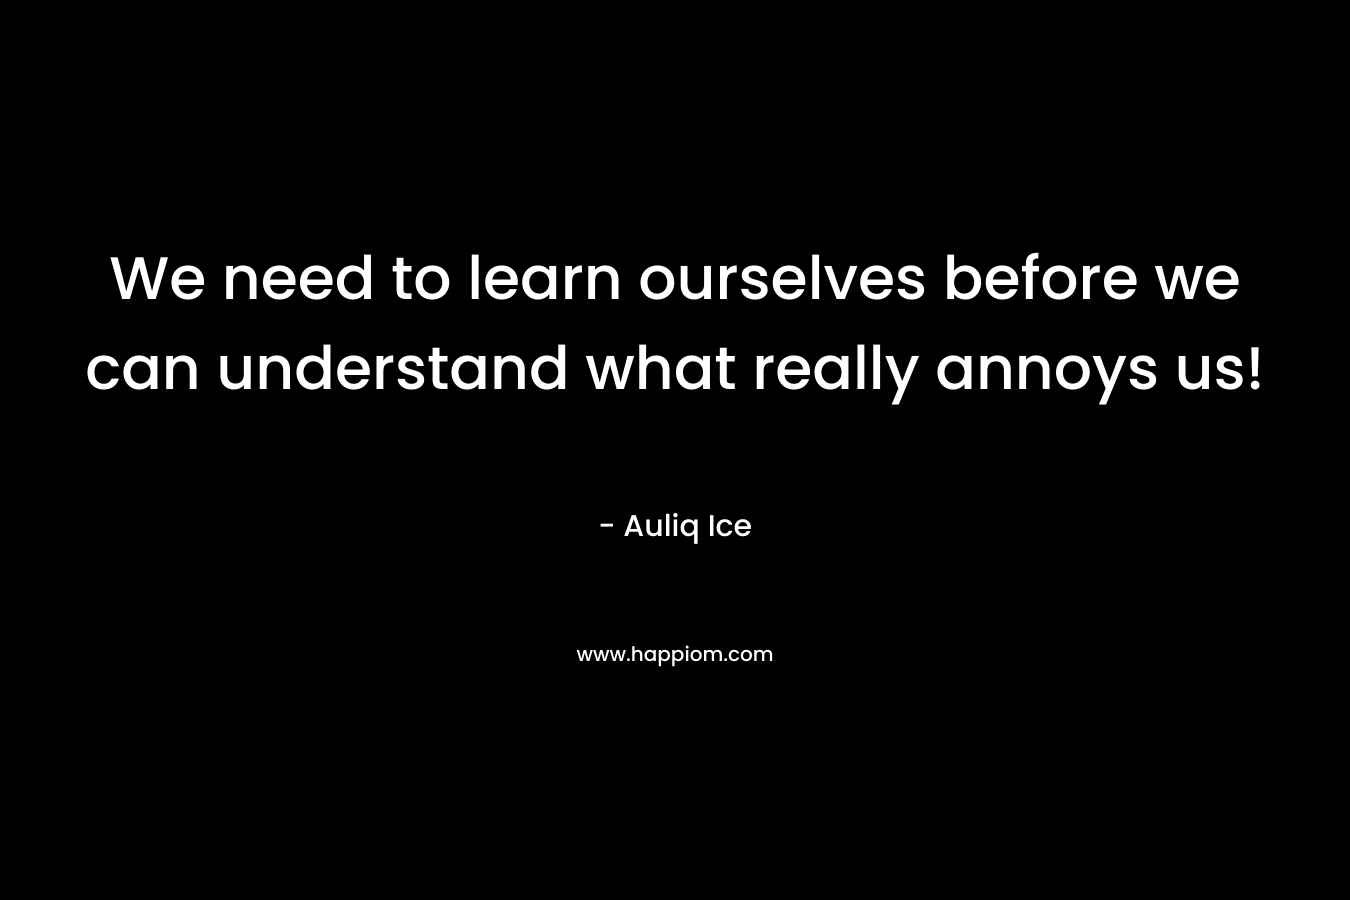 We need to learn ourselves before we can understand what really annoys us!